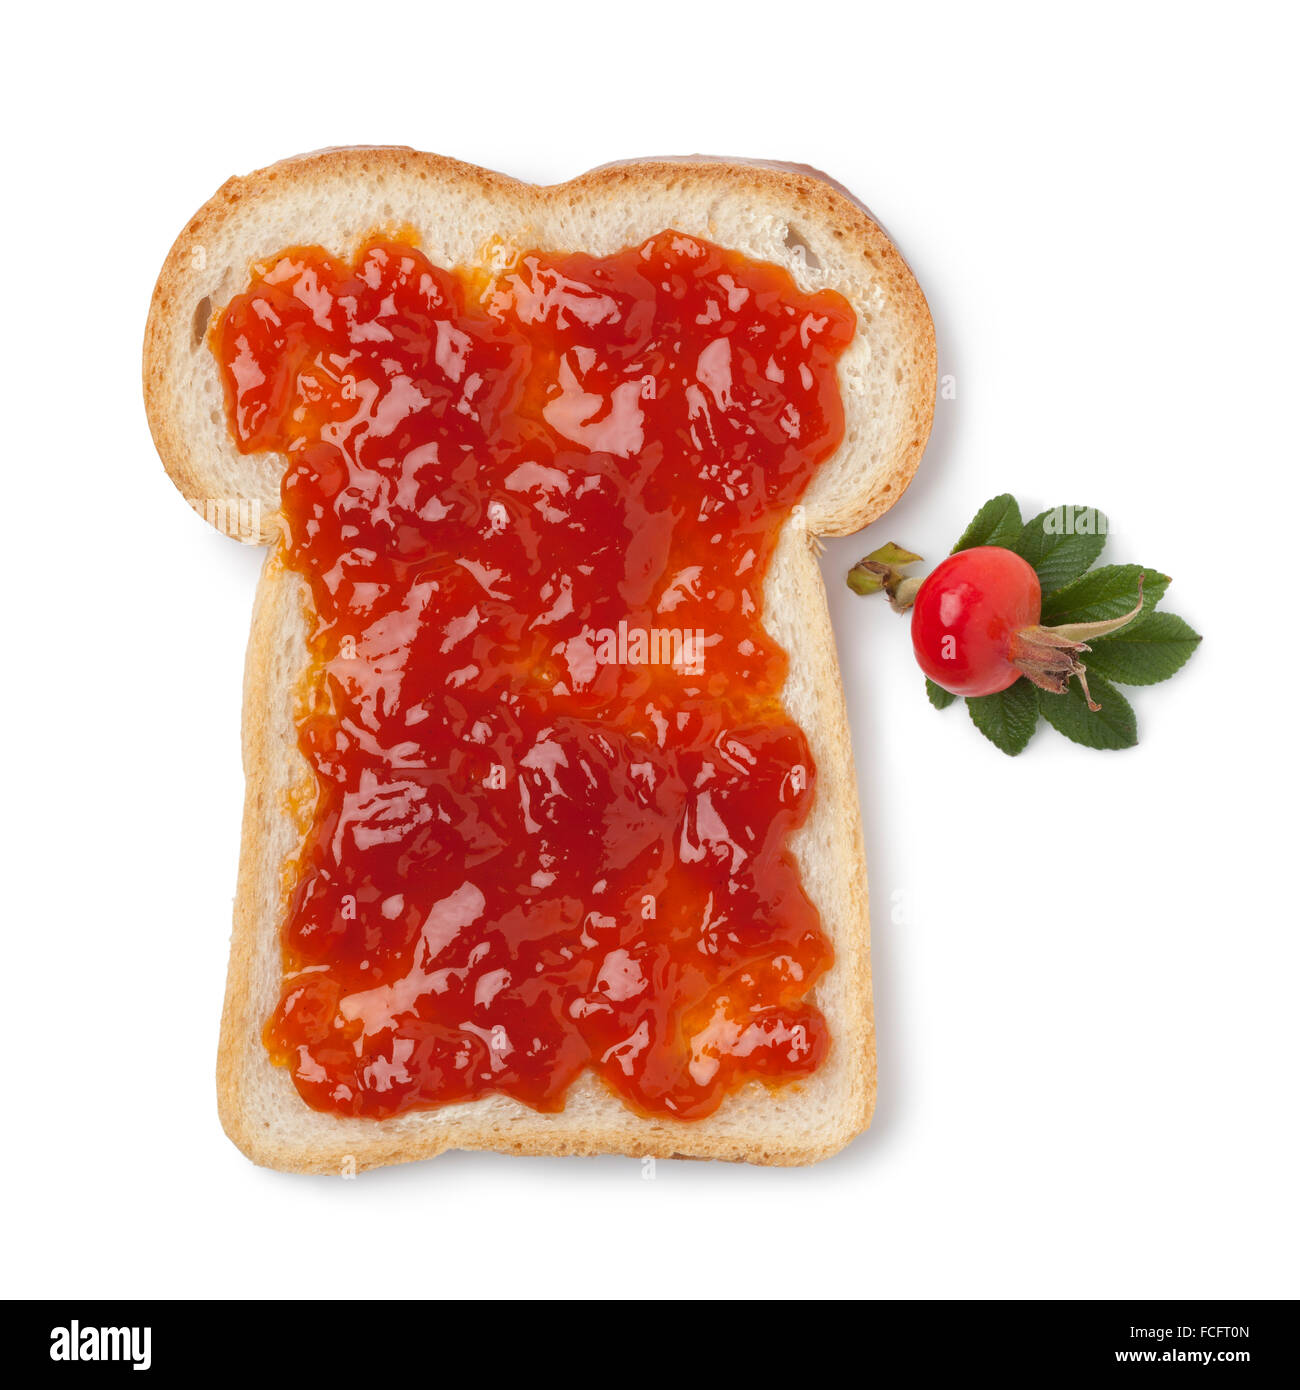 Slice of bread with jam of rose hips on white background Stock Photo